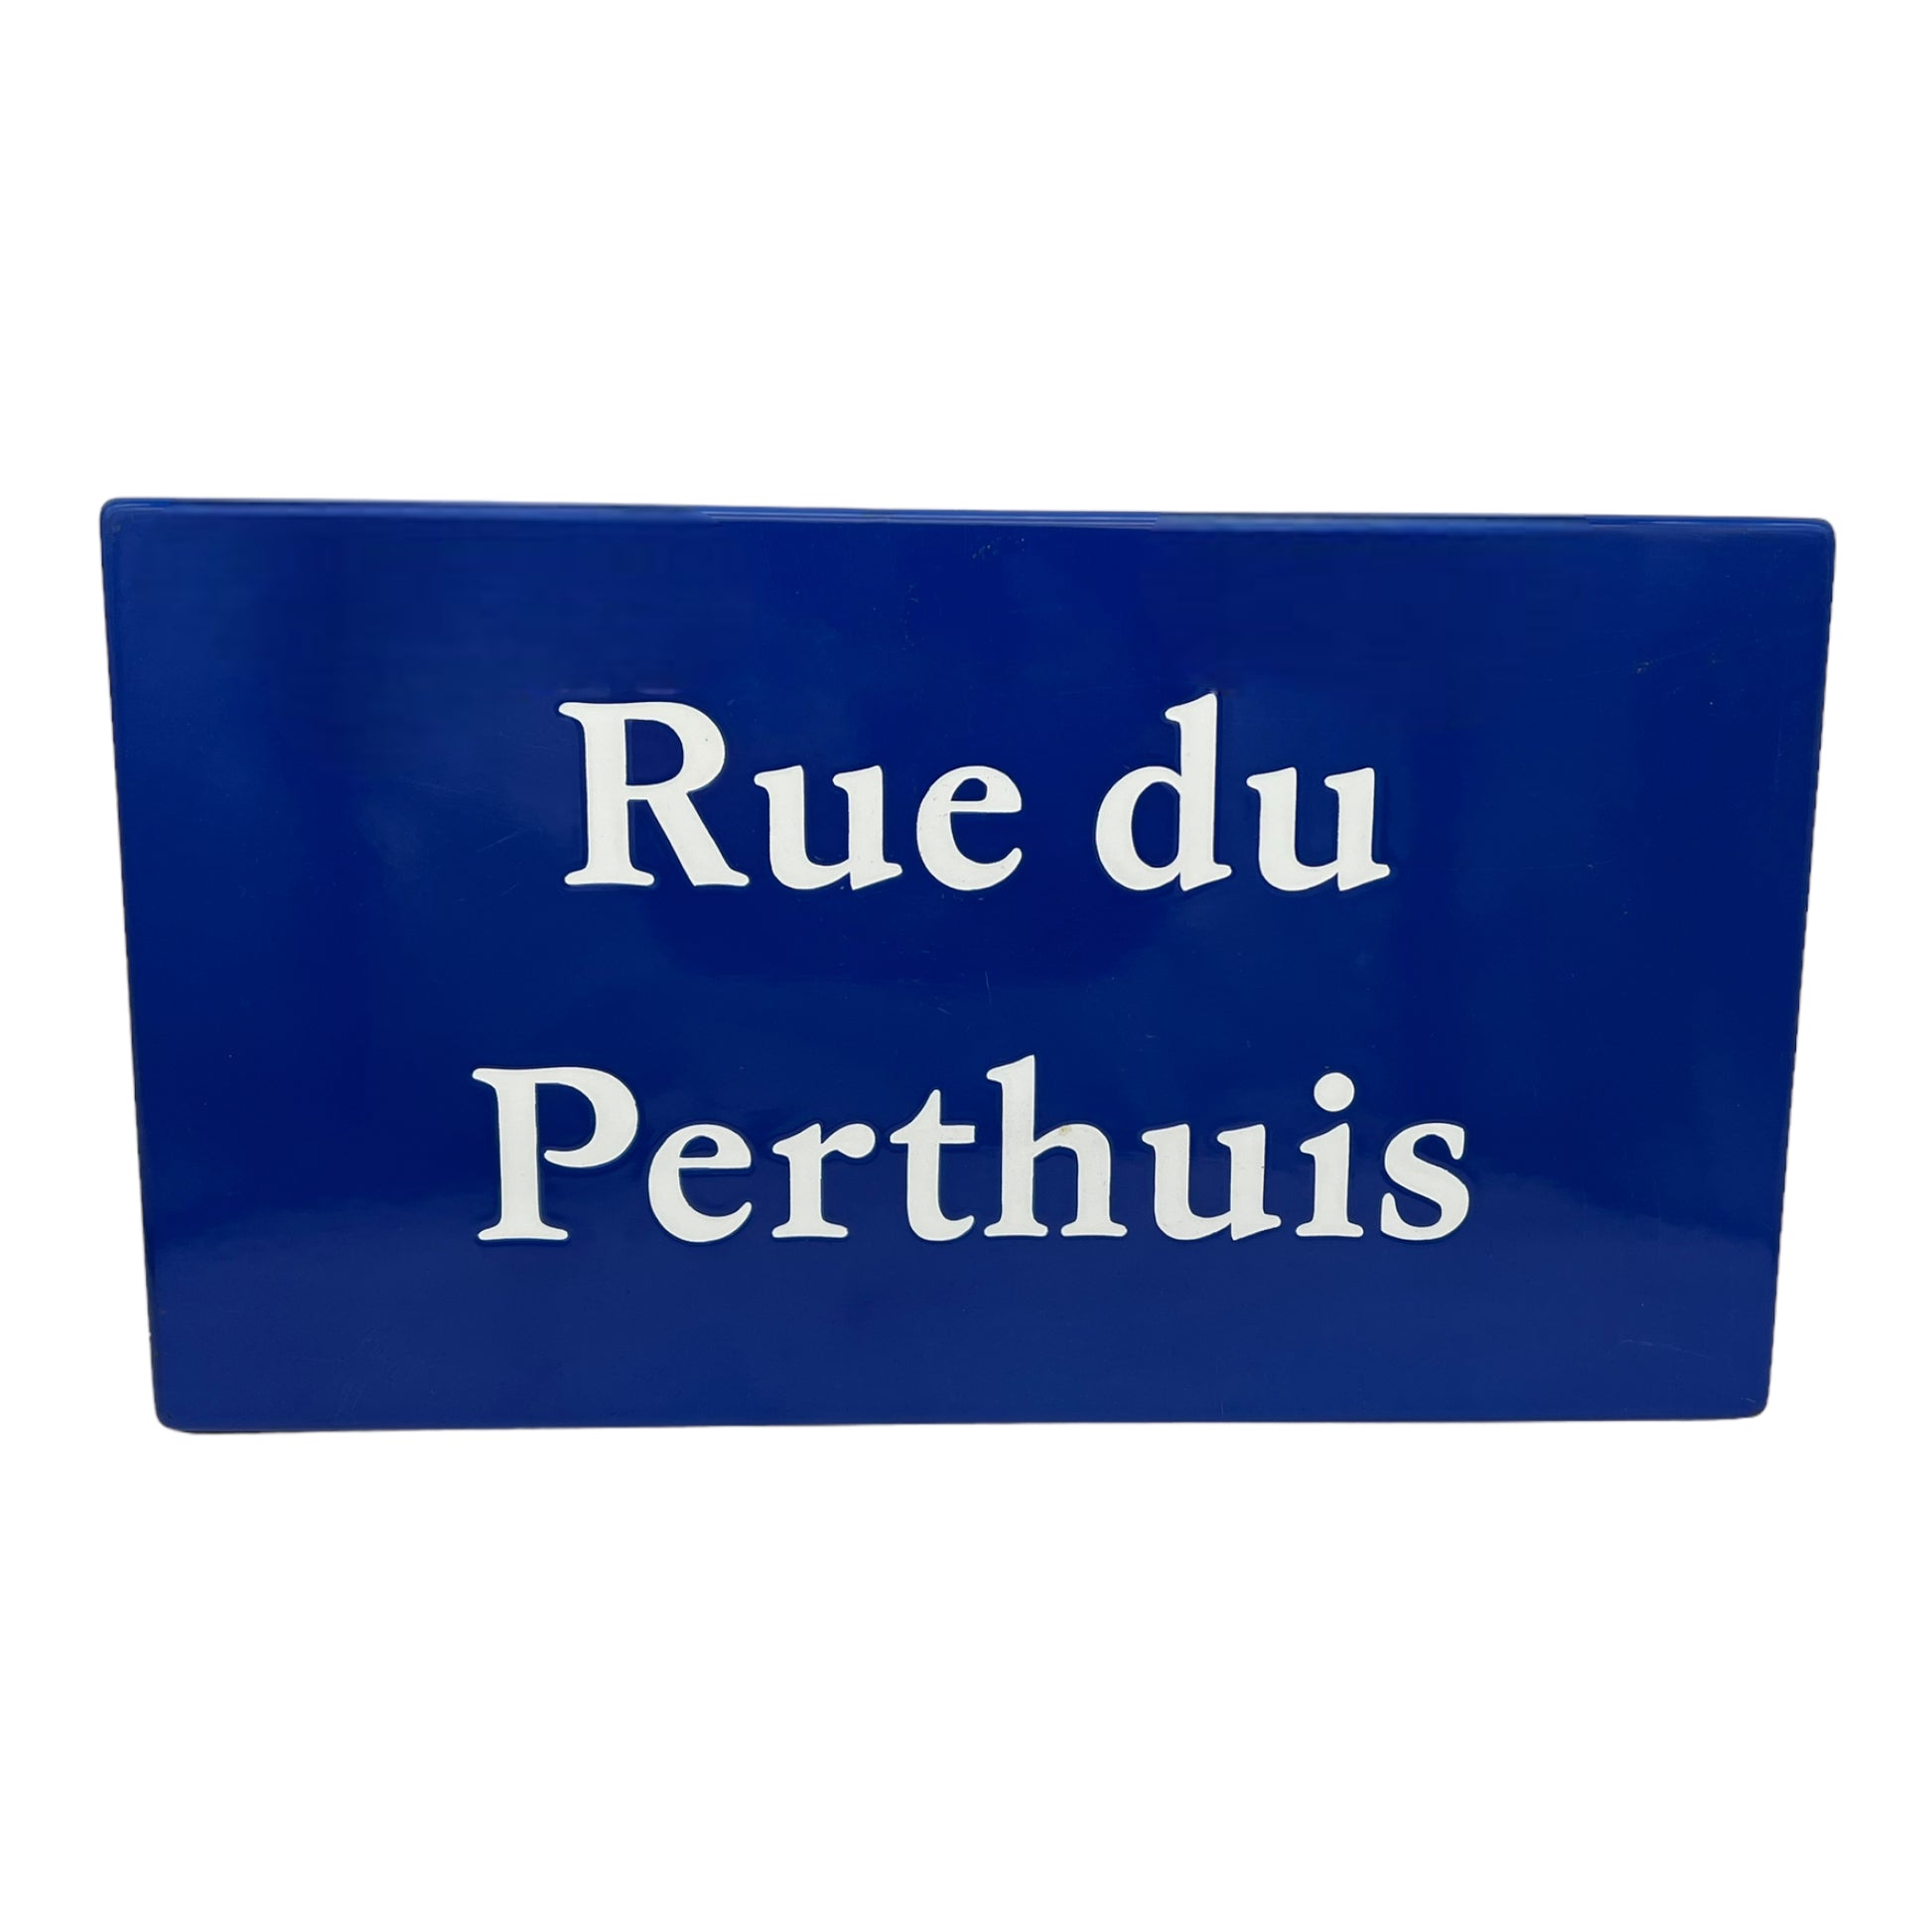 French blue enamel road sign Rue du Perthuis sold by All Things French Store